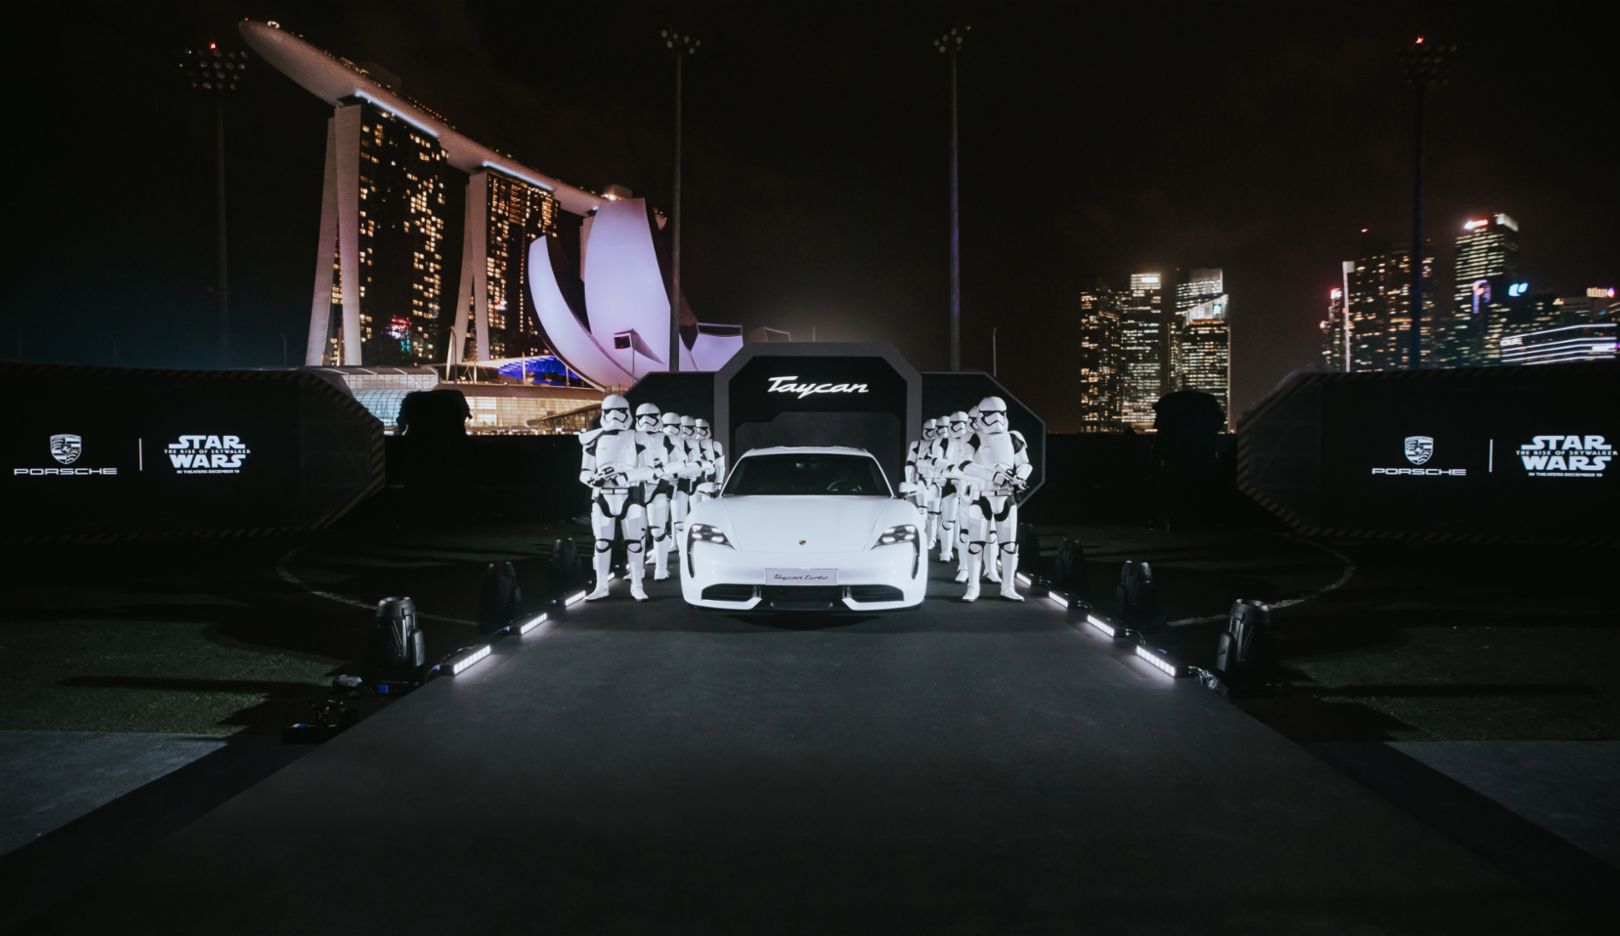 Porsche x Star Wars: Joining forces for the reveal of the Taycan in Singapore